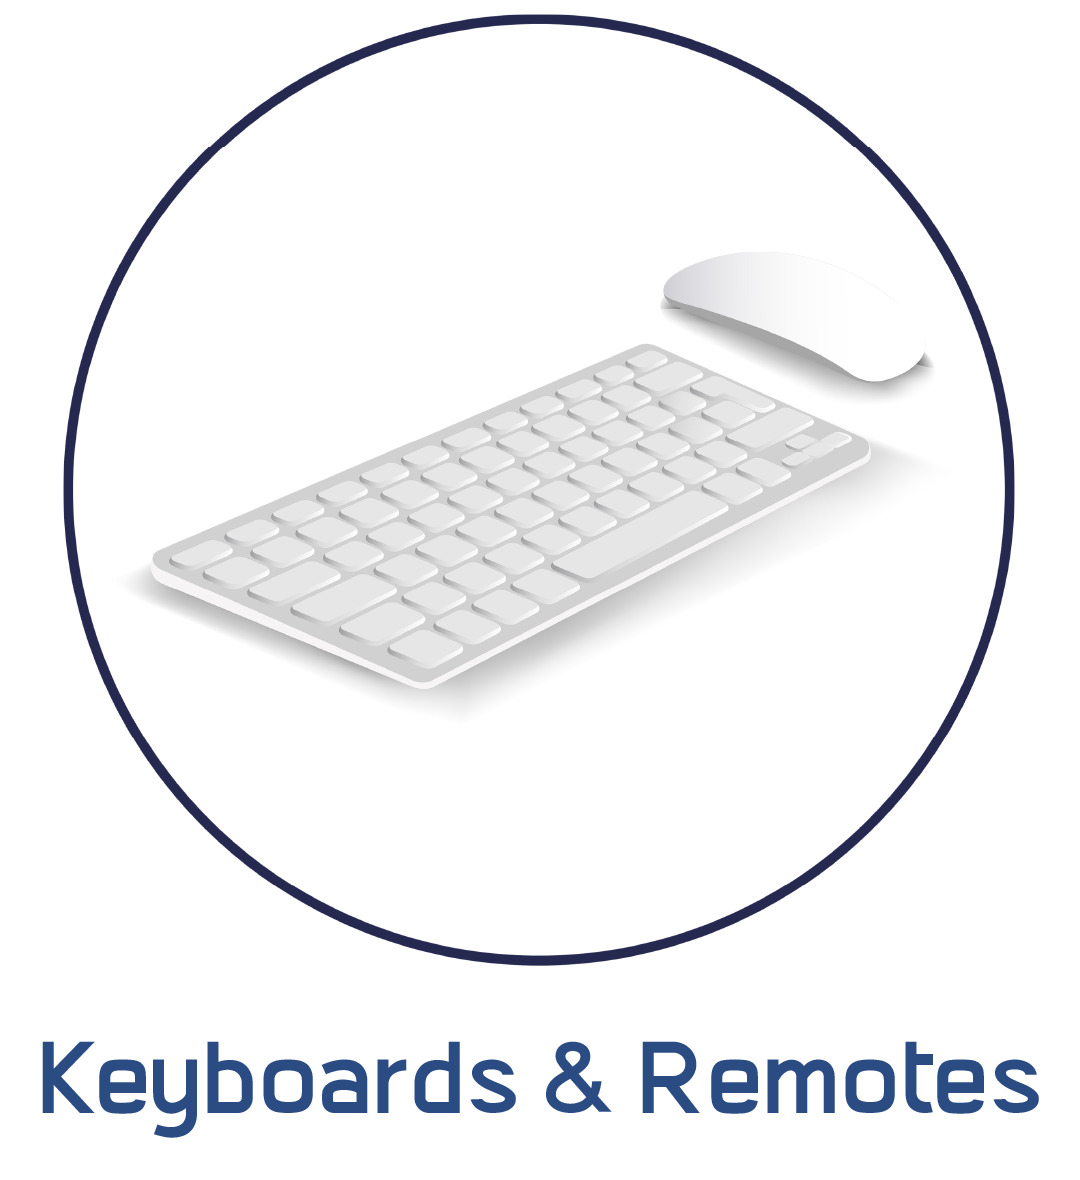 keyboards and mouse and remotes